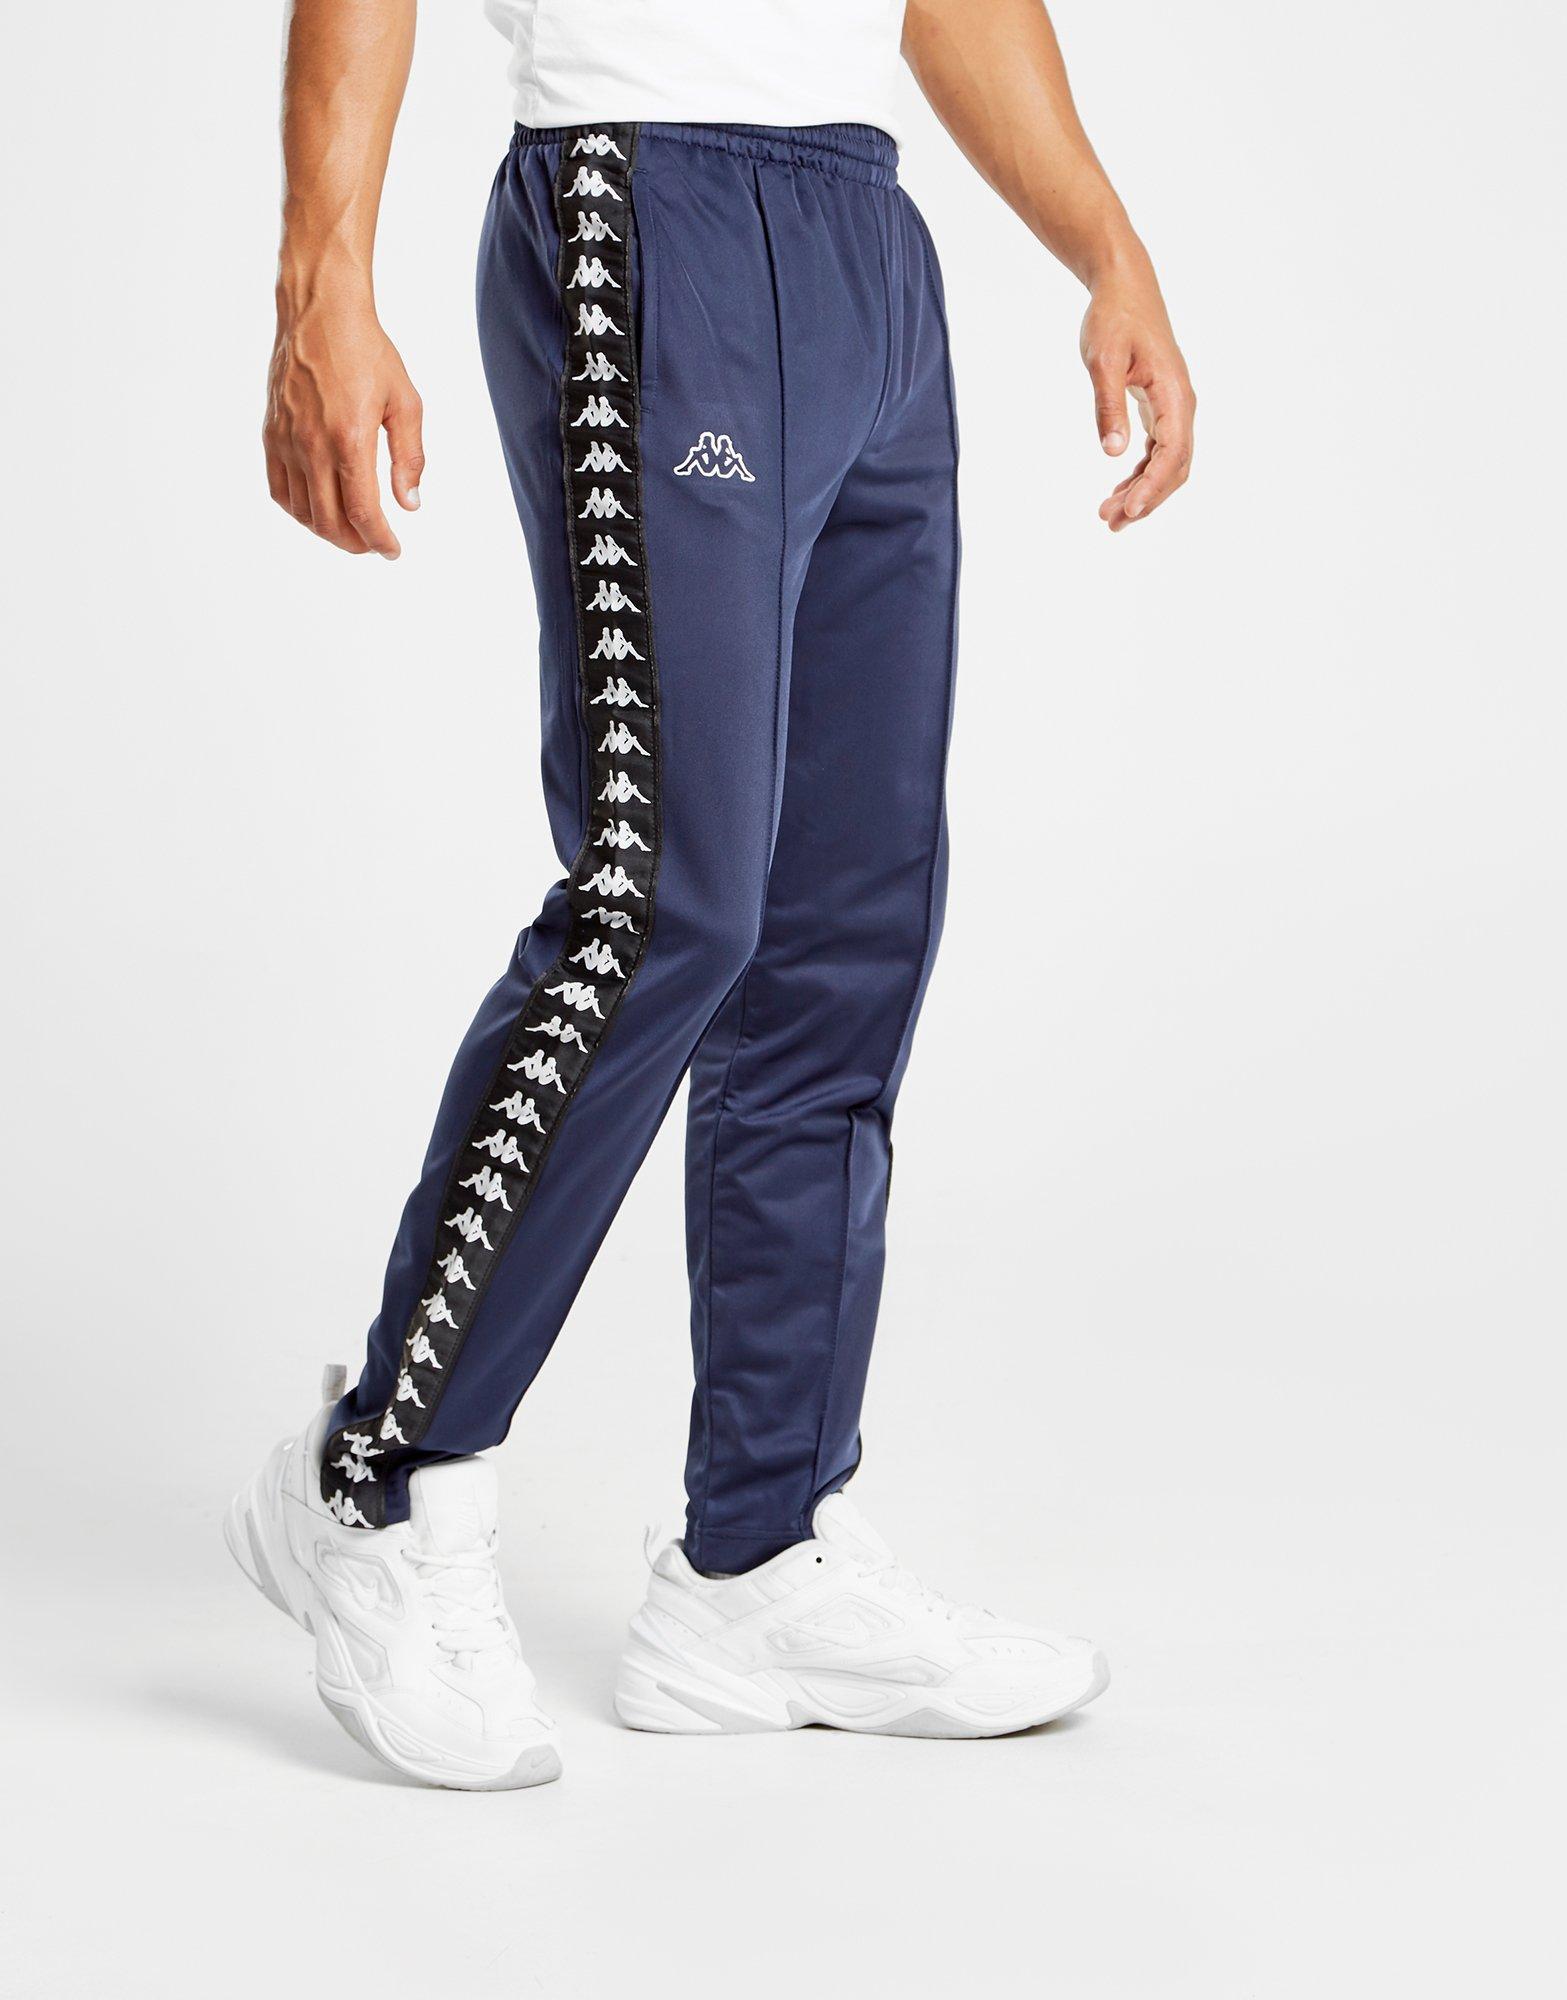 Kappa Gym Pants Online Sale, UP TO 61% OFF